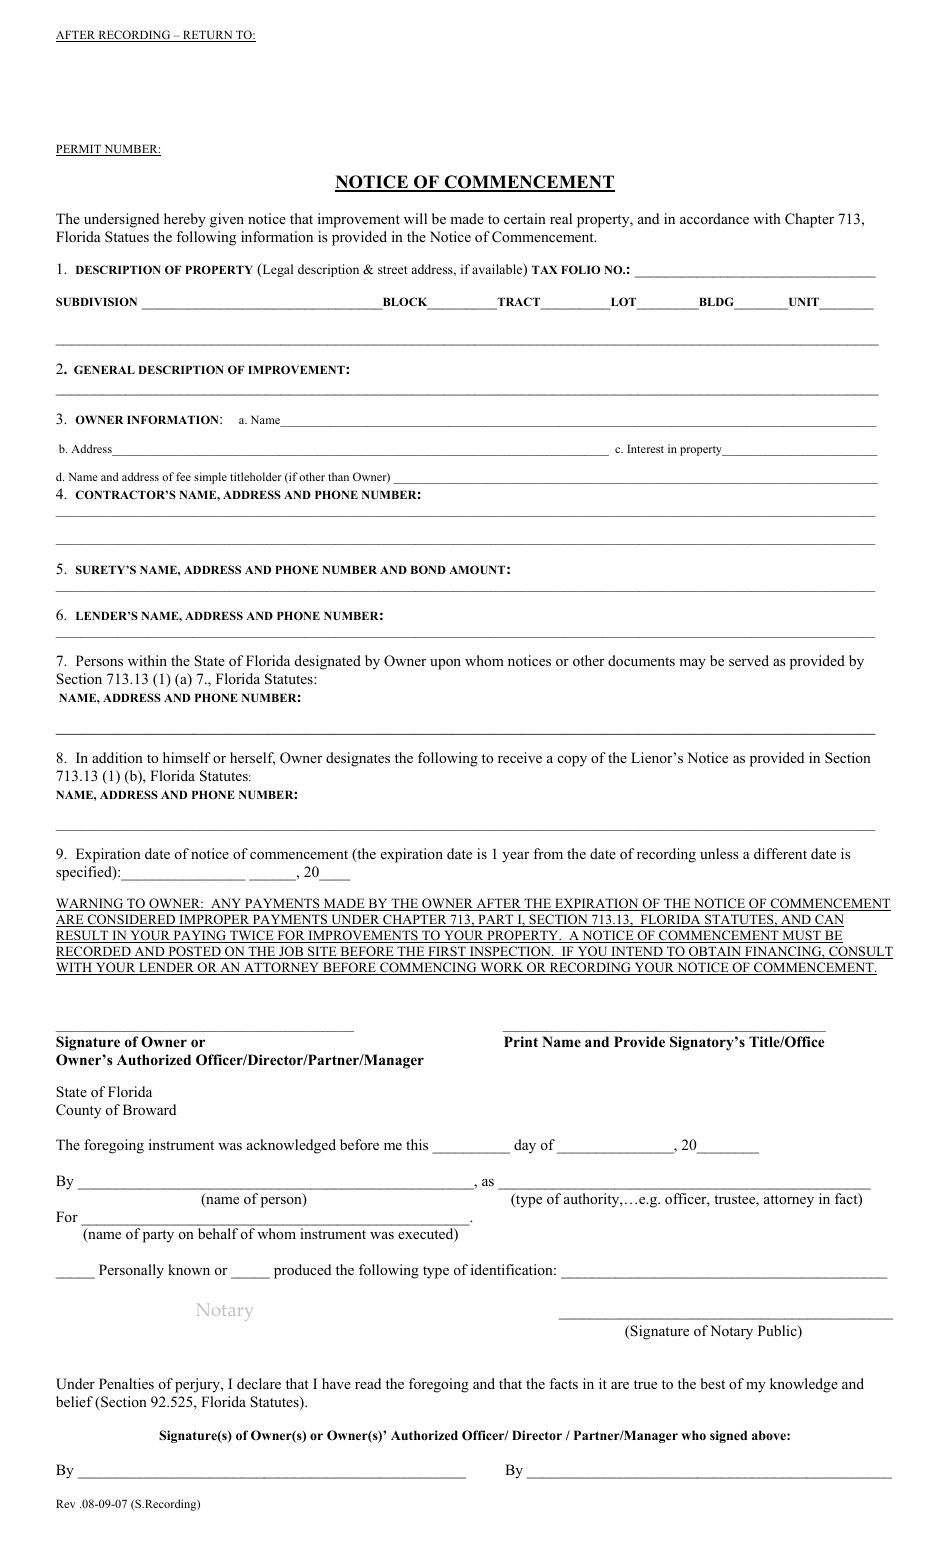 florida-notice-of-commencement-form-nine-points-fill-out-sign